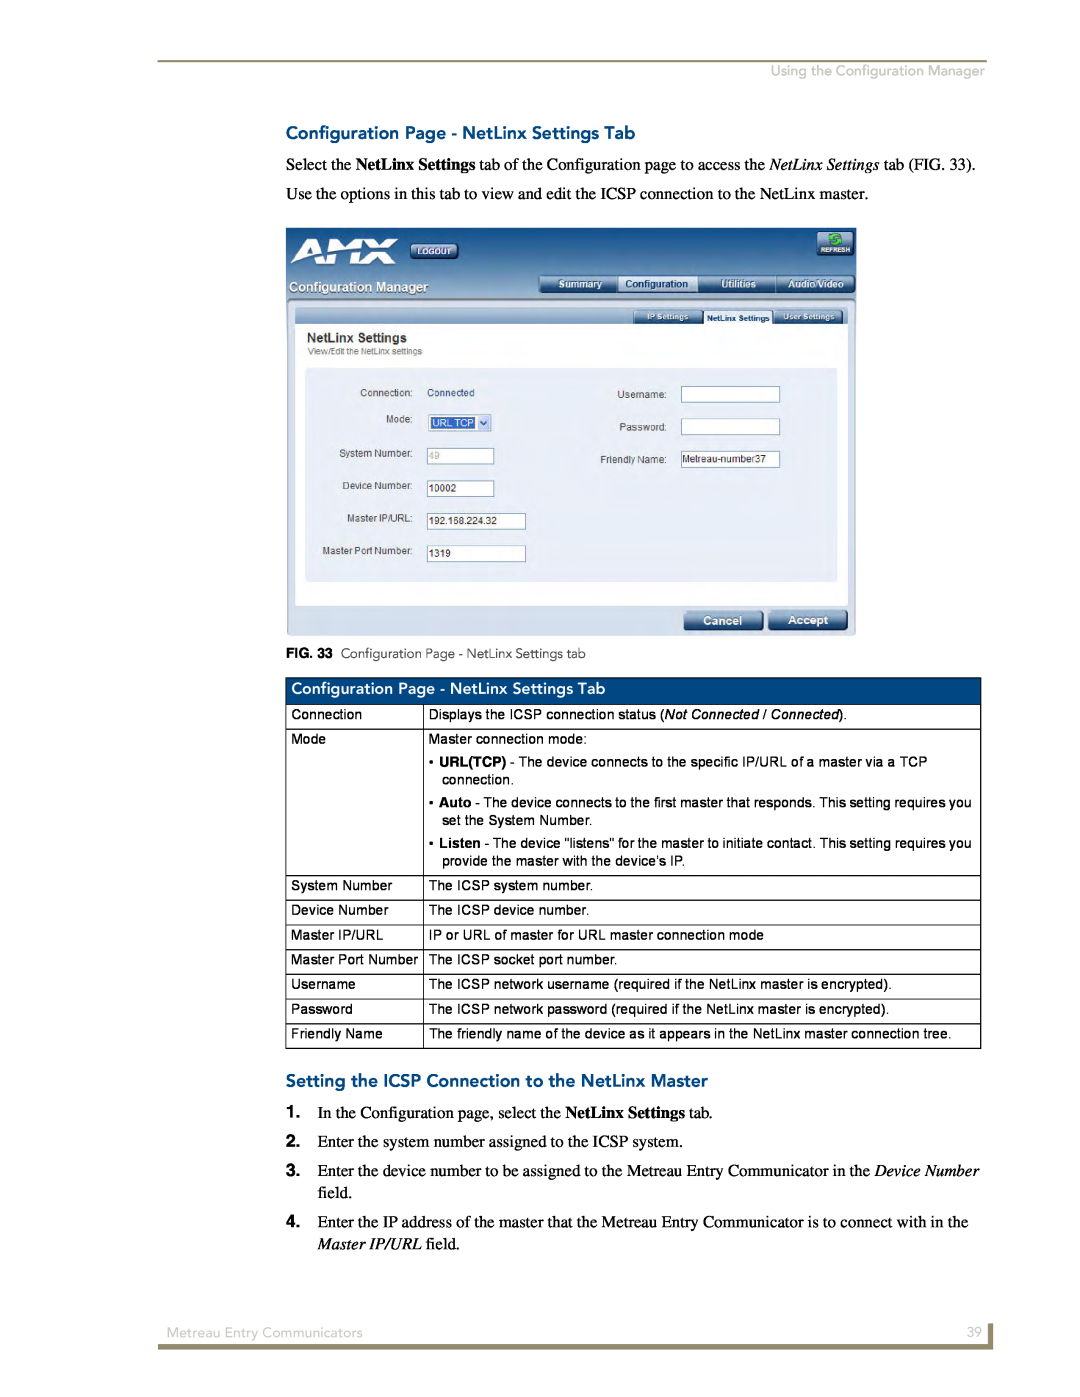 AMX MET-ECOM-D manual Configuration Page - NetLinx Settings Tab, Setting the ICSP Connection to the NetLinx Master 